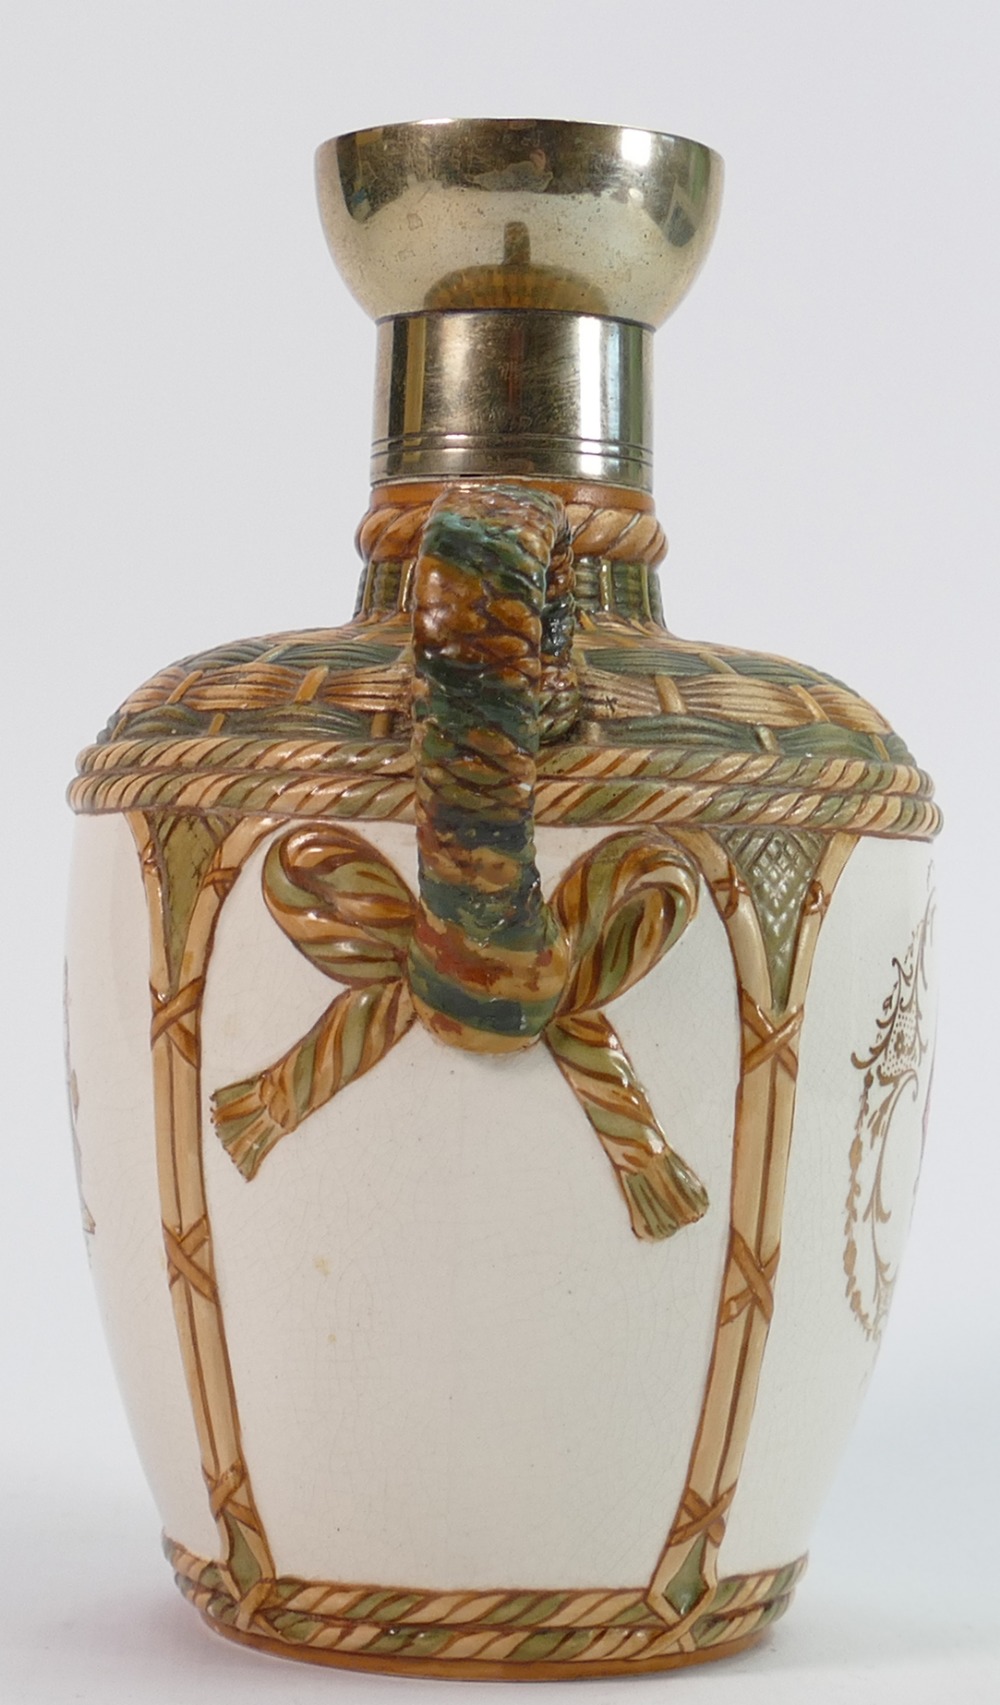 19th century Taylor Tunnicliffe Brandy decanter: Decorated with basket ware top & handle with coat - Image 5 of 5